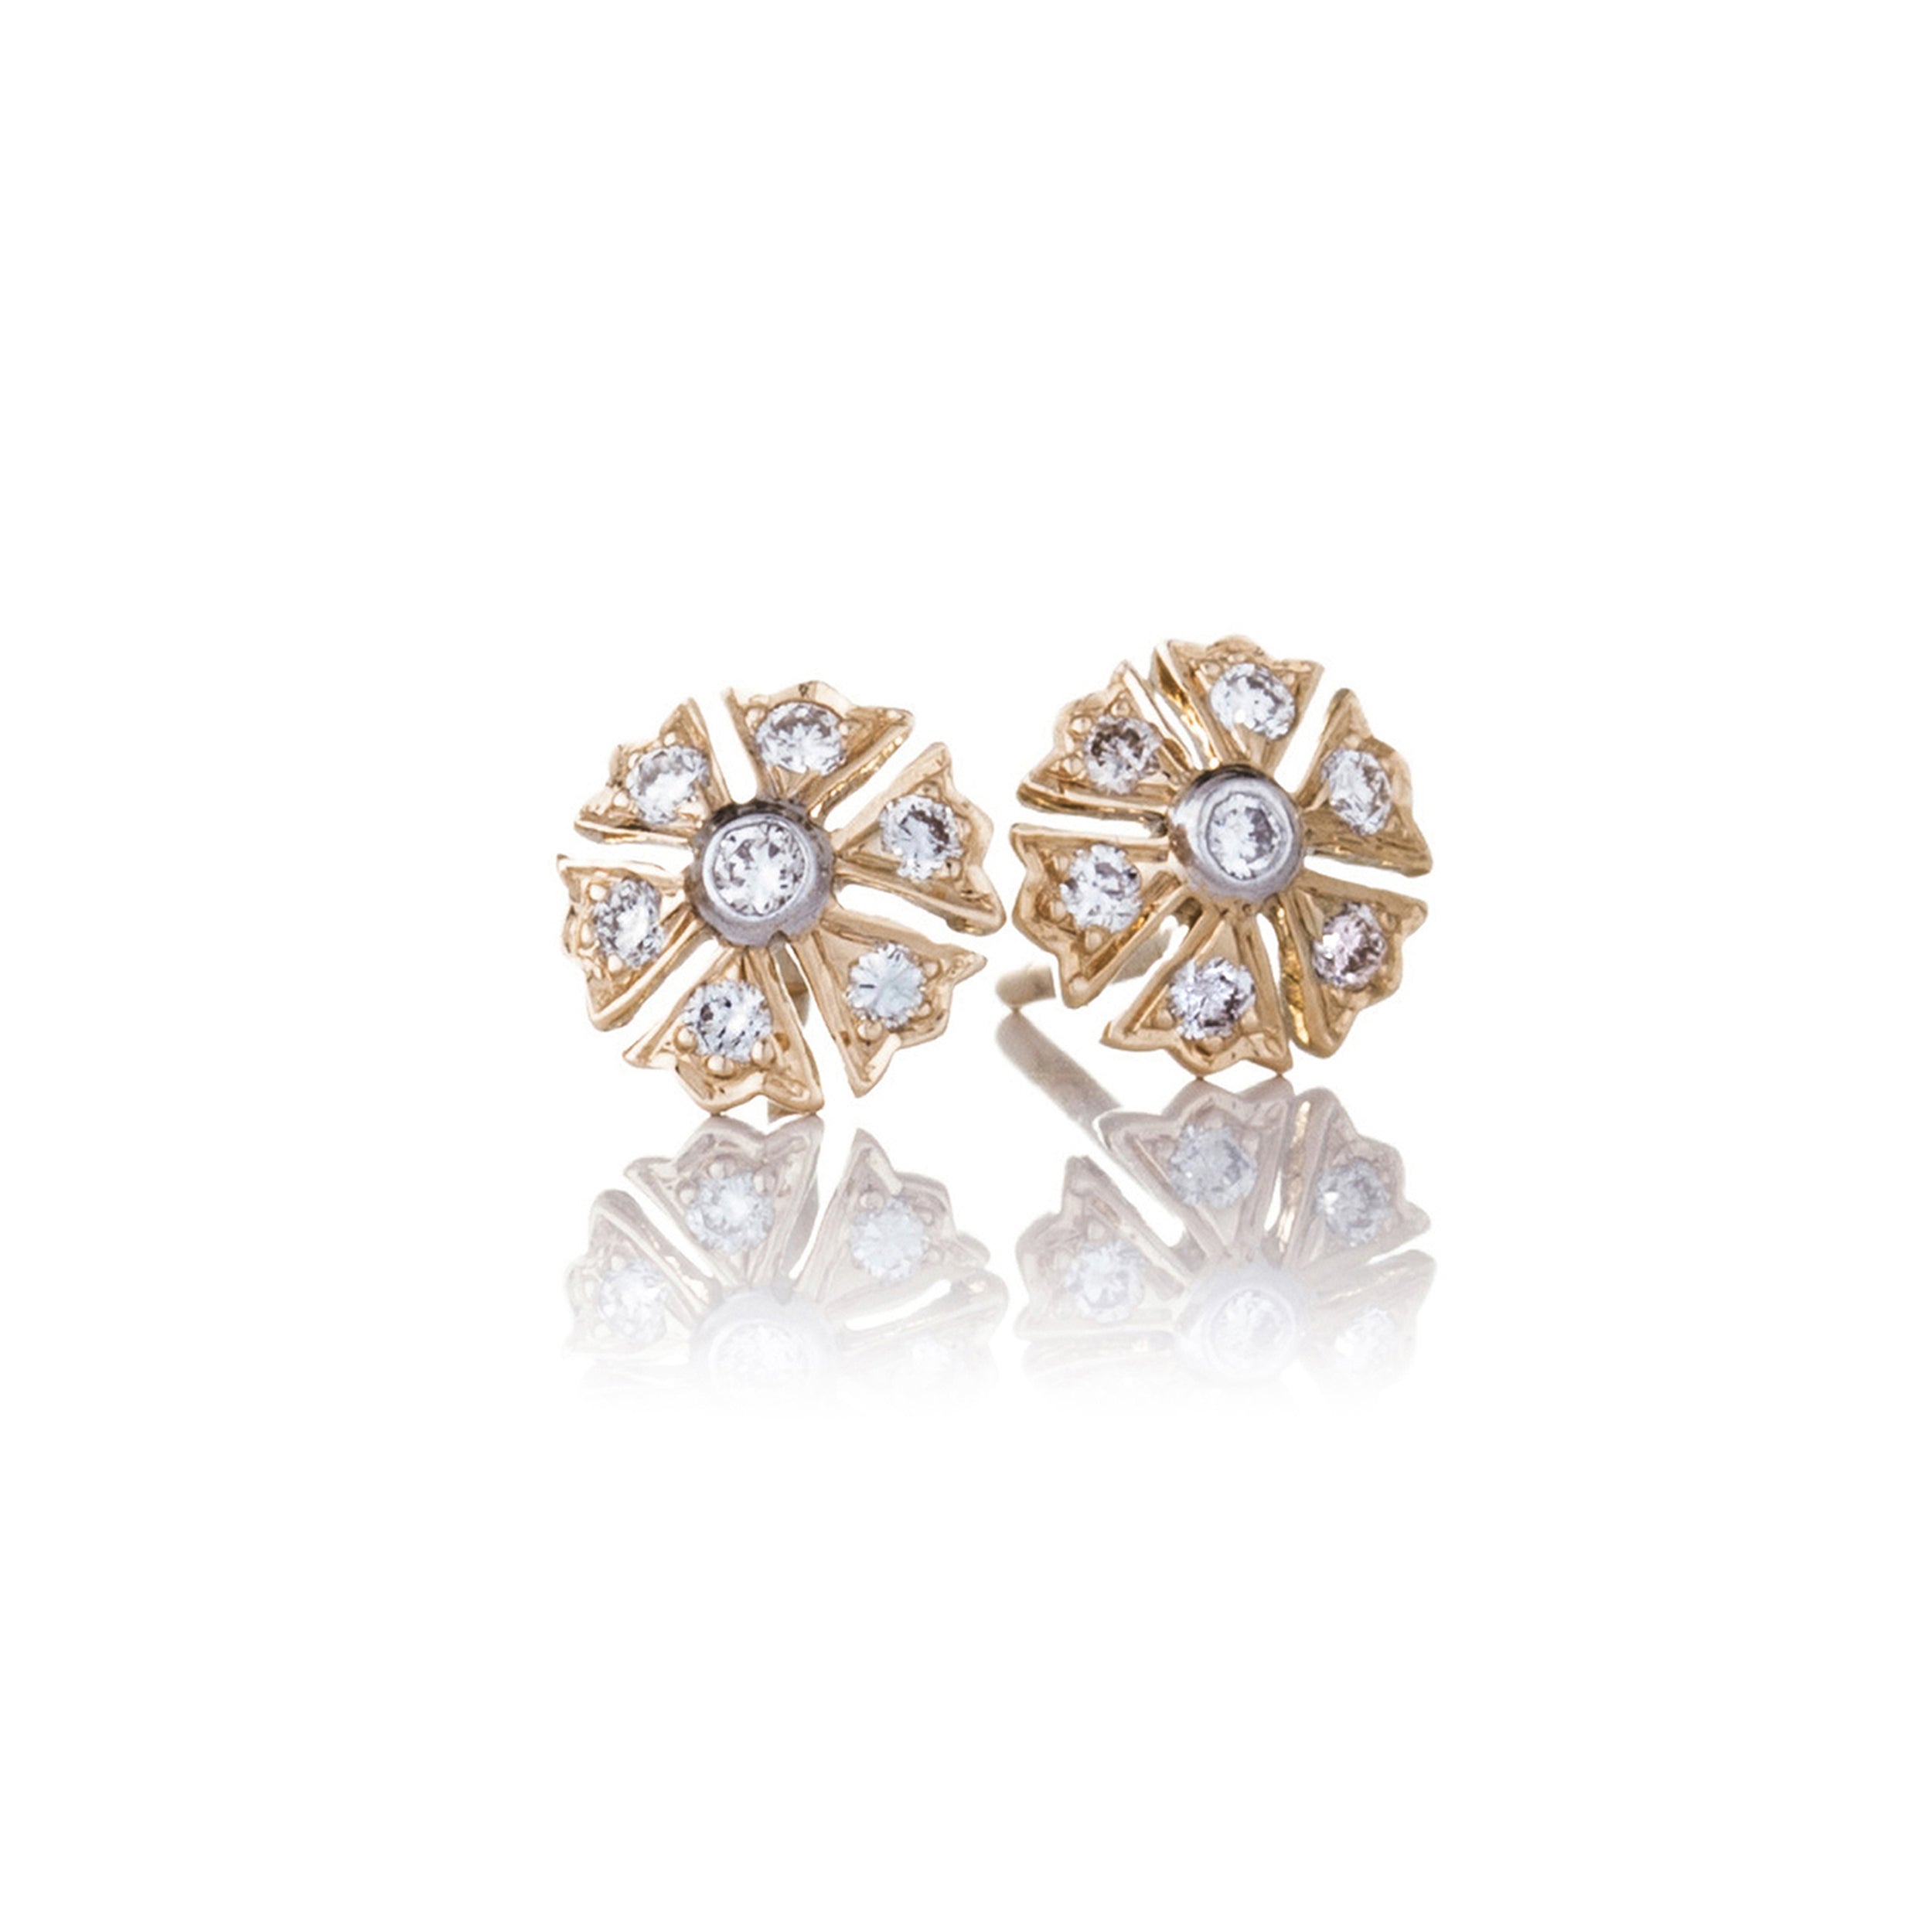 The Camelia Earrings - White and Gold